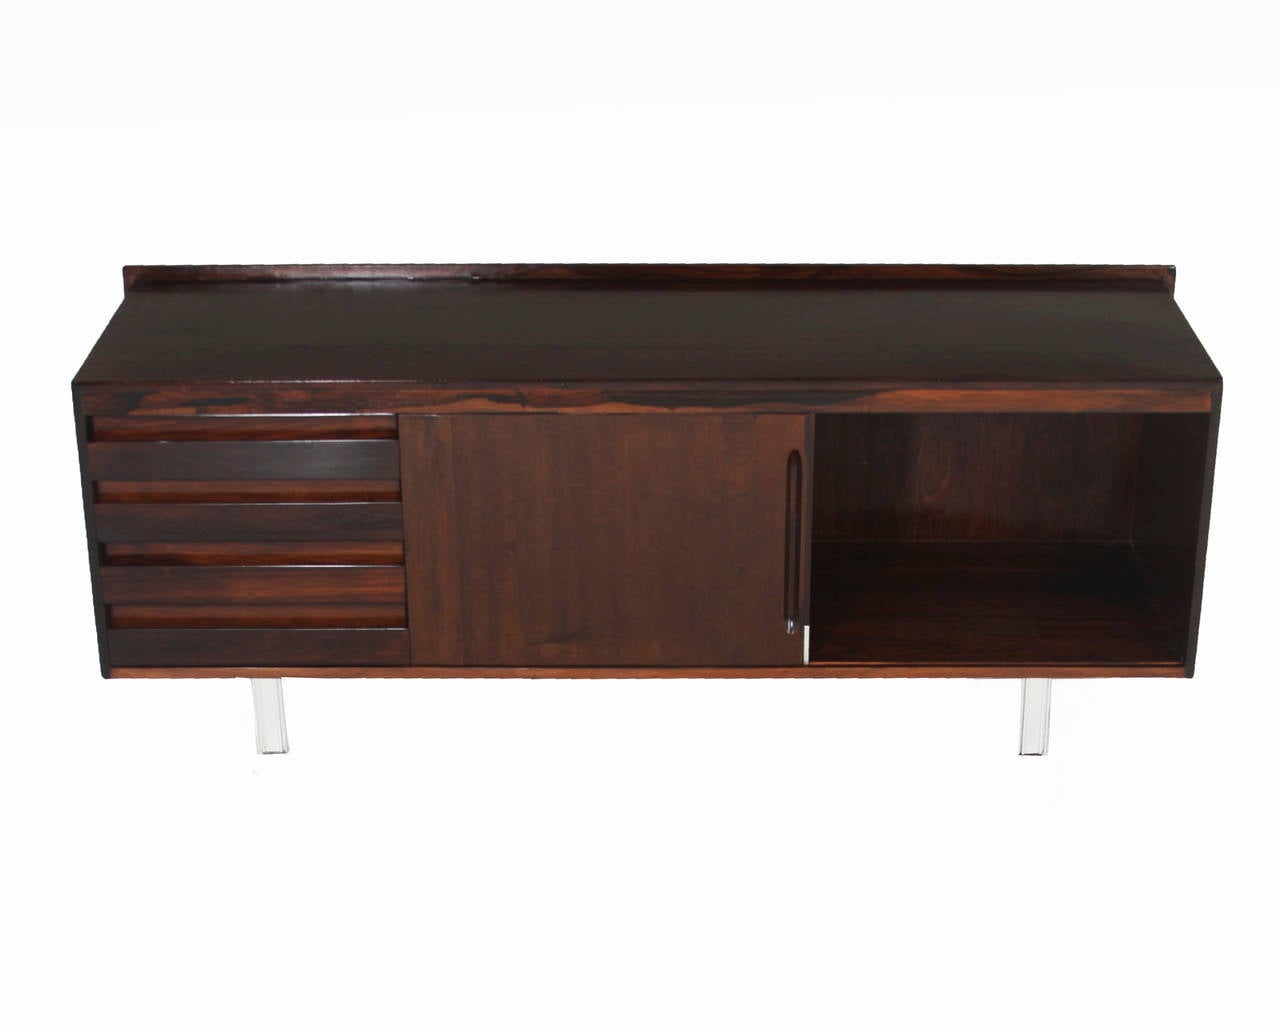 Brazilian rosewood credenza with four chrome legs, one section of drawers and a sliding door. This would be perfect for a media cabinet.

Many pieces are stored in our warehouse, so please click on 